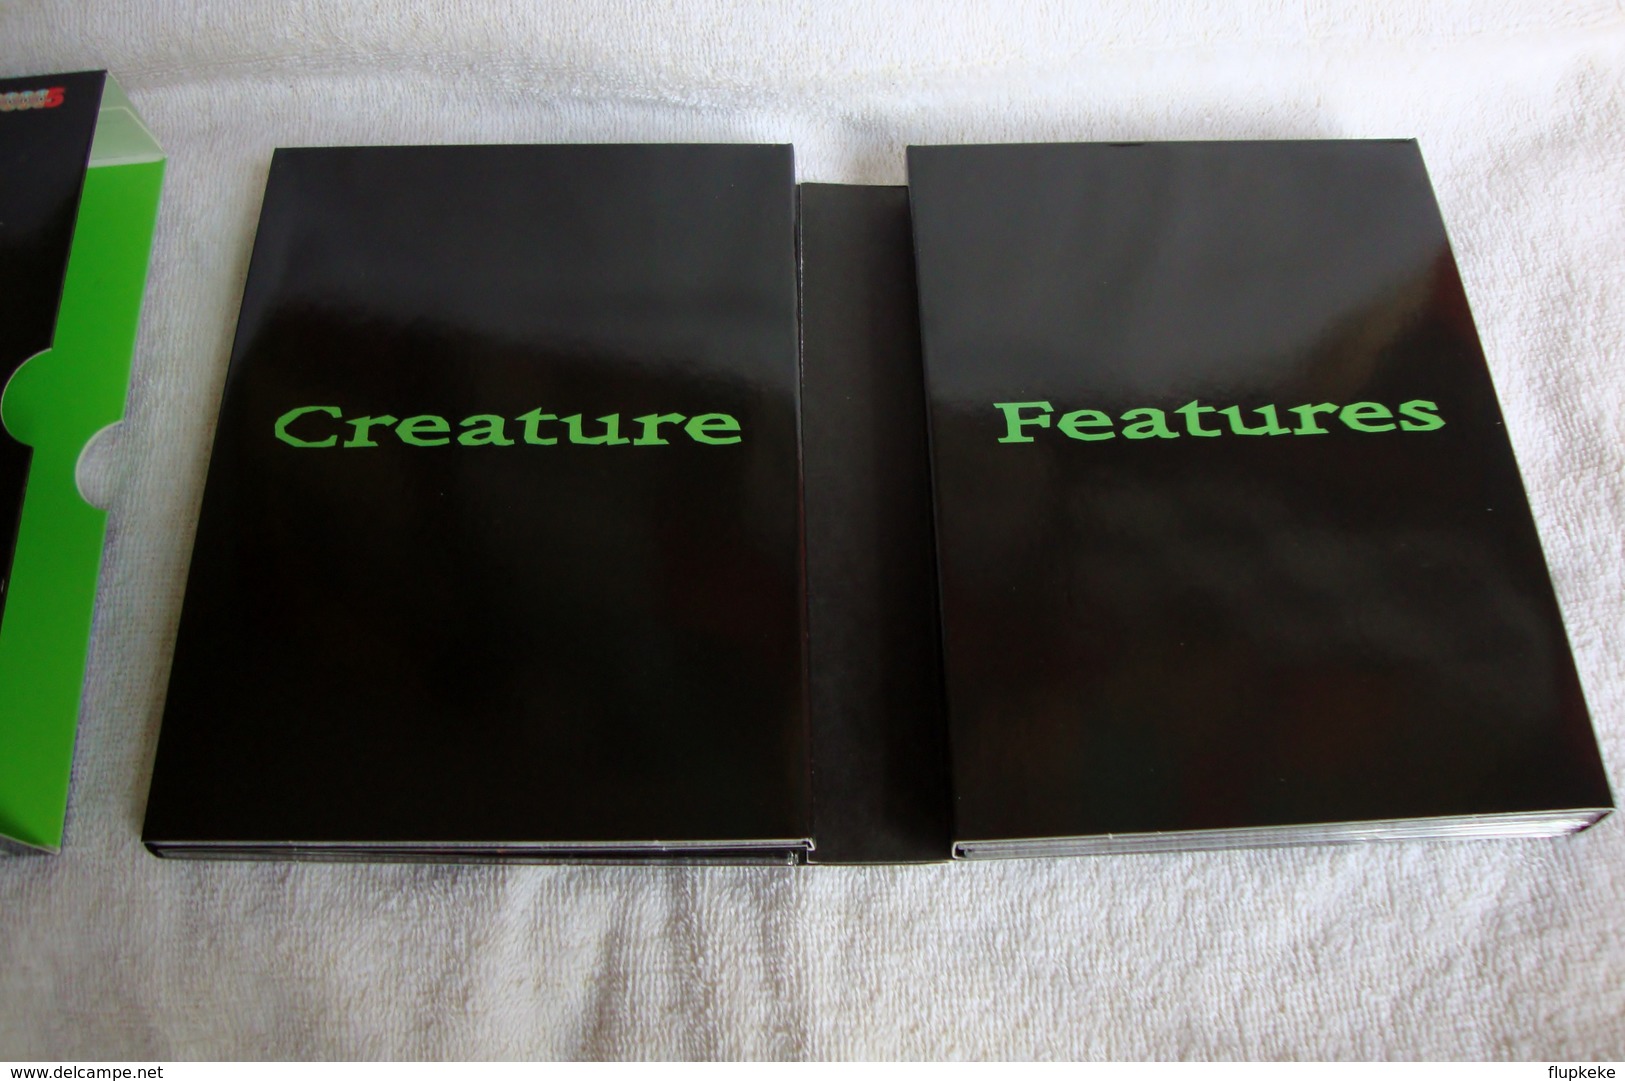 Dvd Zone 2 Creature Features She Creature The Day the World Ended Earth vs. Spider Teenage Caveman How to Make a Monster